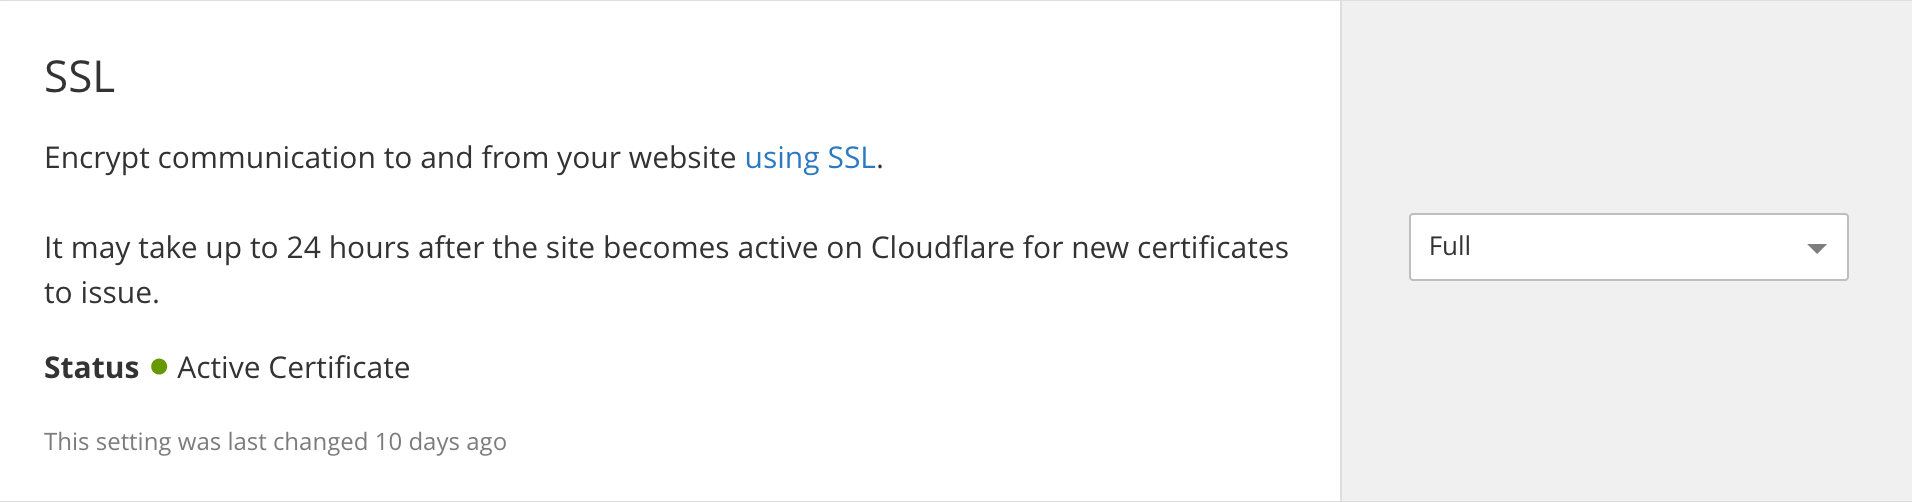 Cloudflare free wildcard SSL was issued